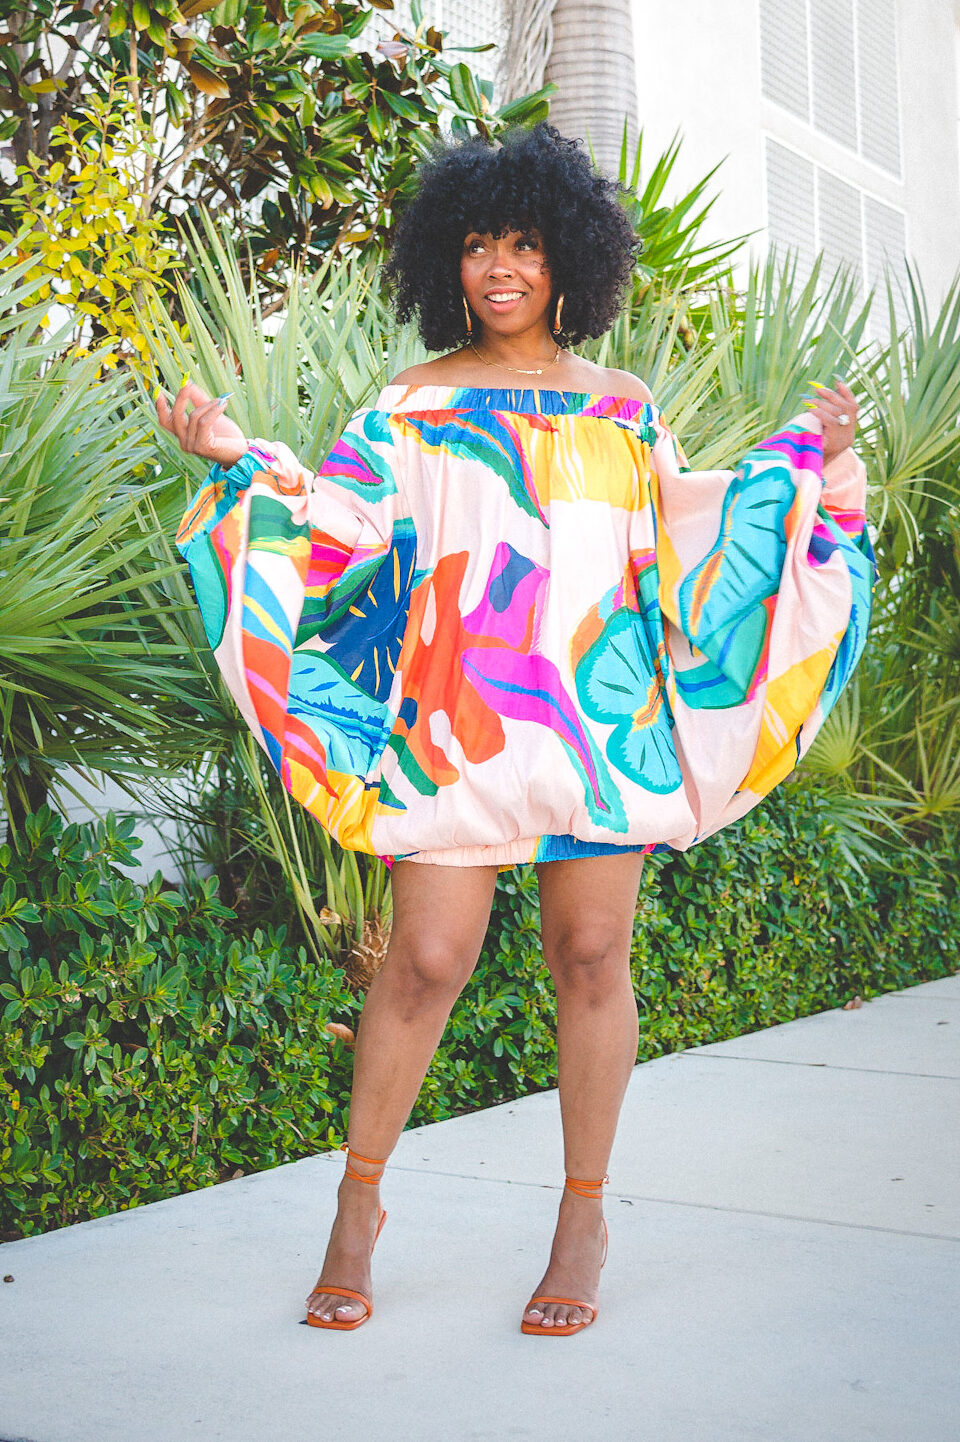 SWEENEE STYLE, SPRING LOOKBOOK, INDIANAPOLIS FASHION INFLUENCER, STYLE BLOGGER, FASHION BLOG, HOW TO DRESS FOR SPRING, NATURAL HAIR INFLUENCER, BROWN GIRL WHO BLOGS